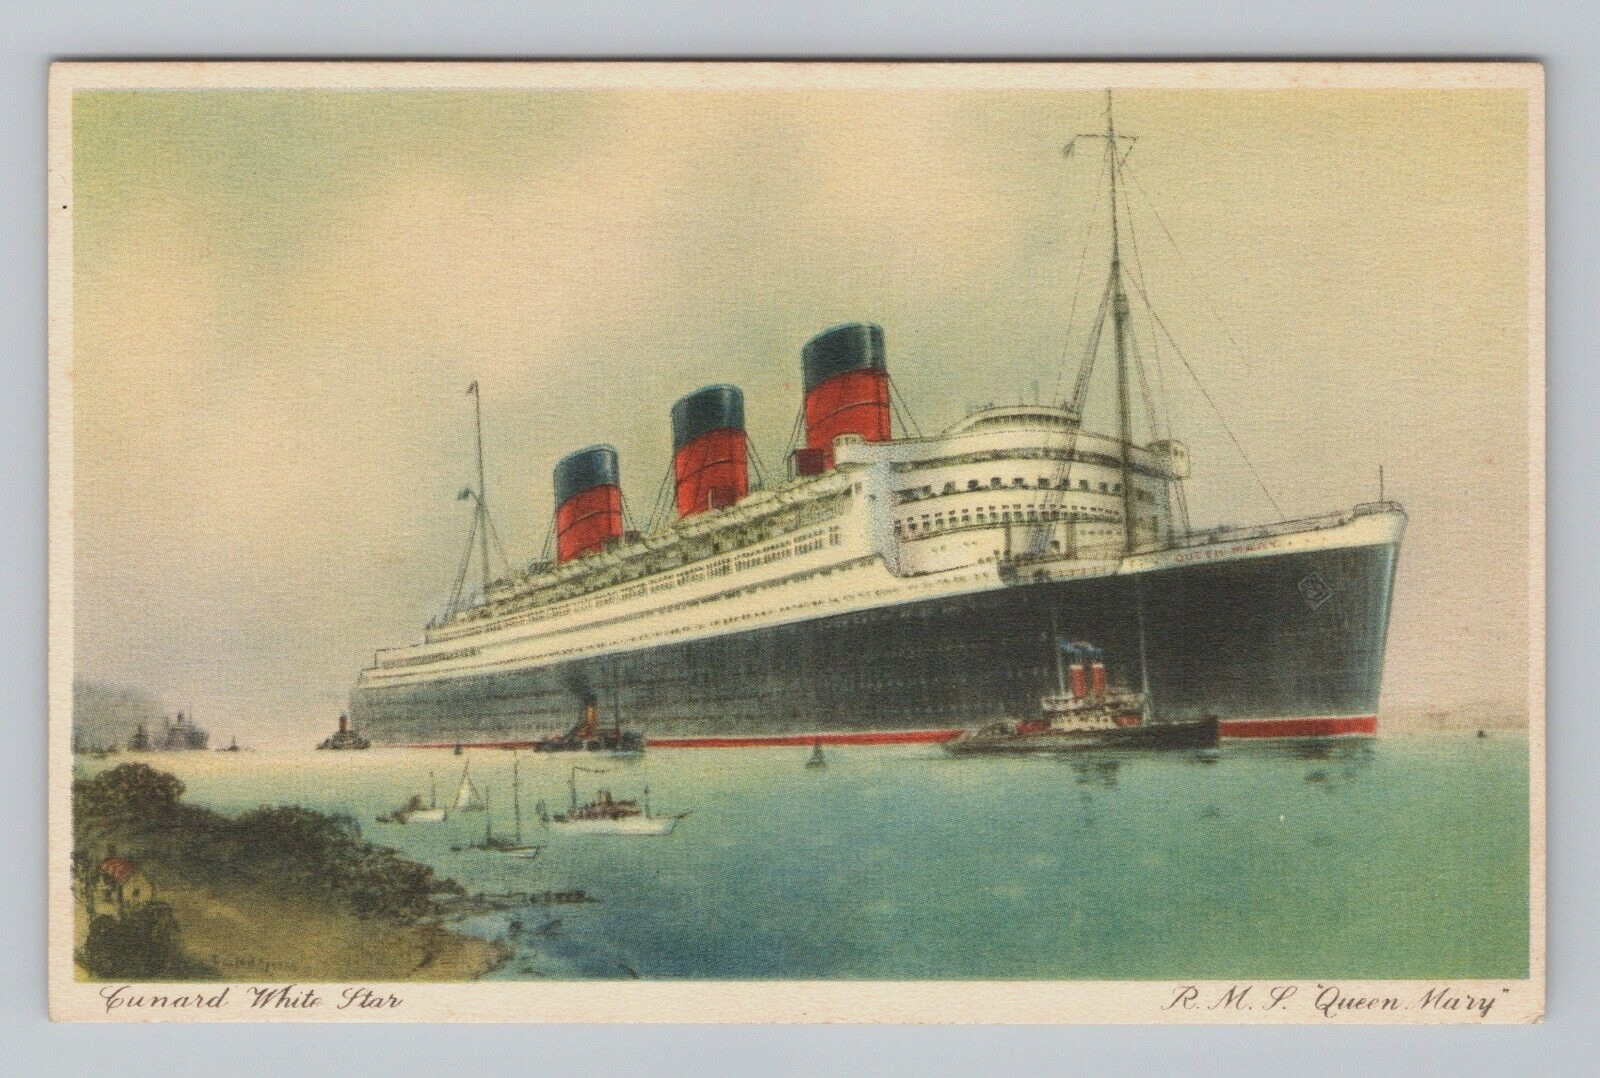 Postcard Linen Ship RMS Queen Mary Cunard White Star Line Tug Boats Travel View